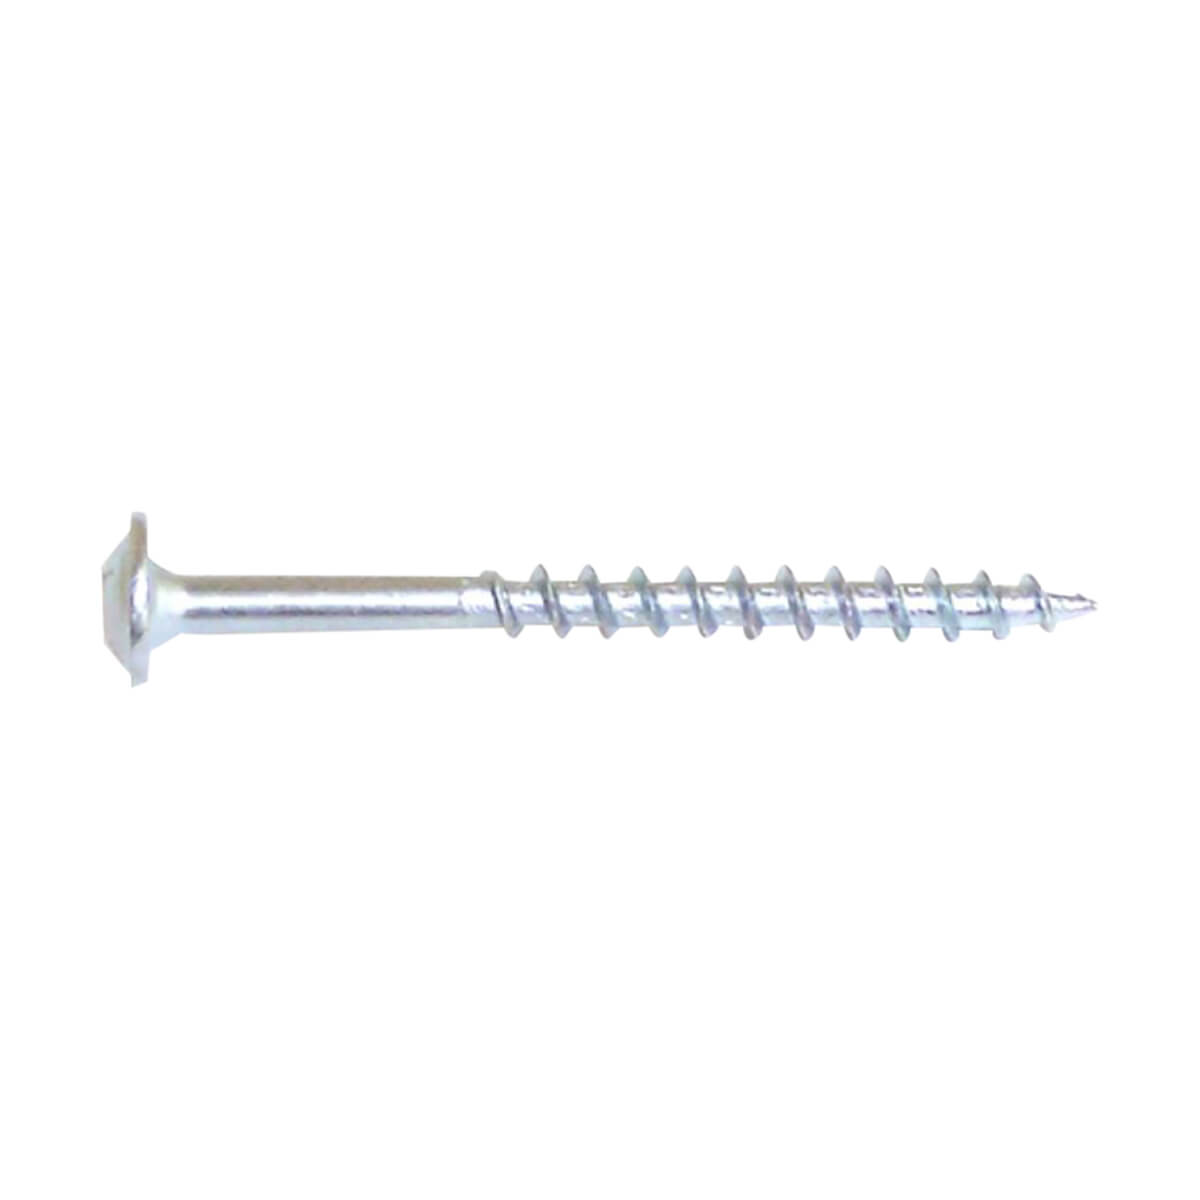 Pan-Head with Washer Pocket Screws - #8 X 1-1/2-in - 100 / Box